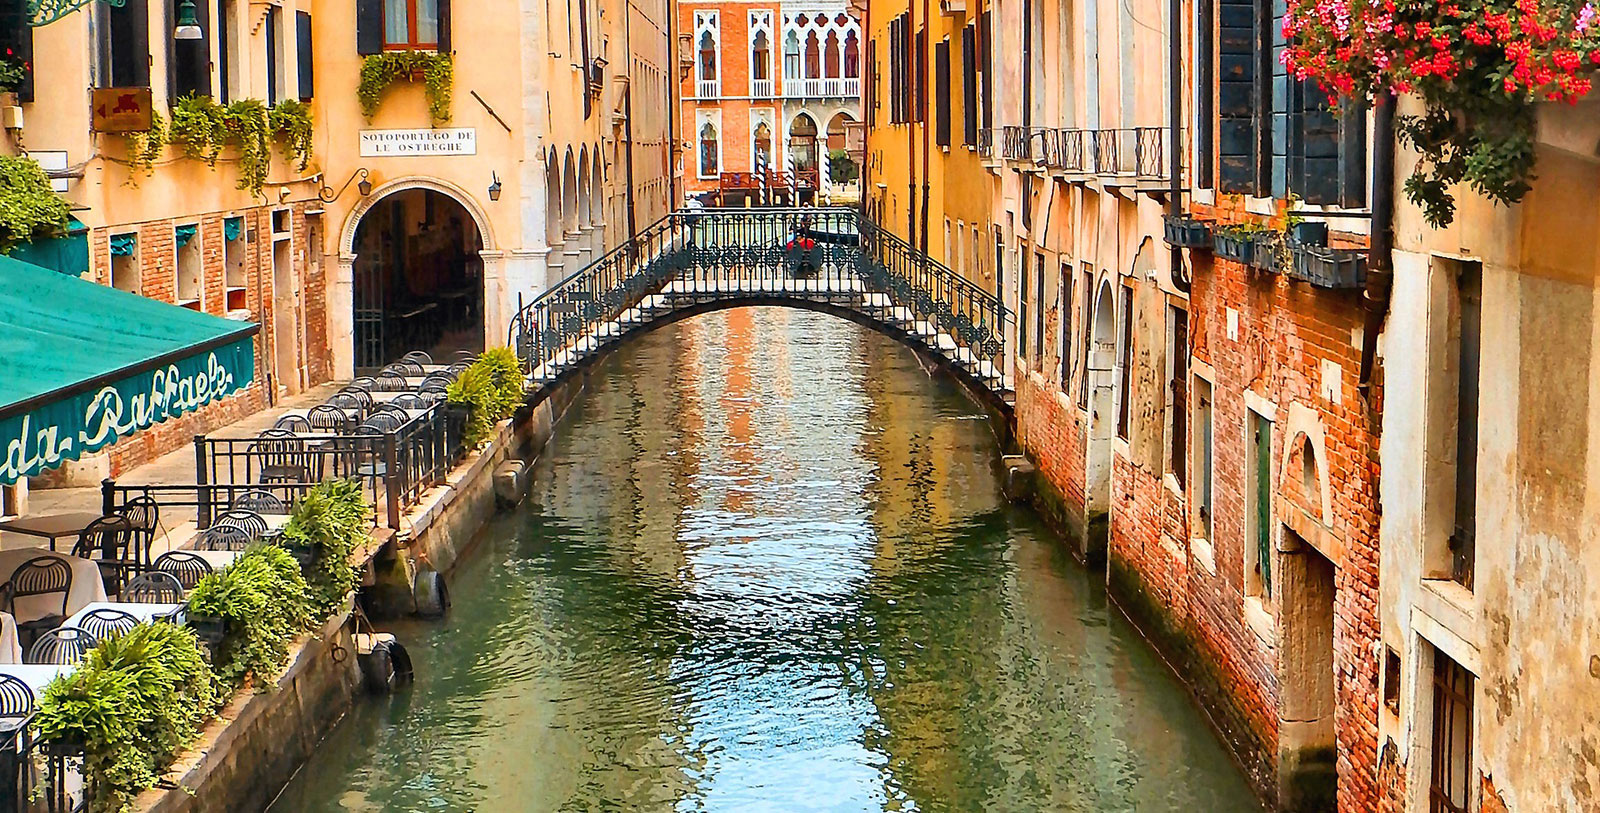 Experience a romantic gondola ride down the majestic Grand Canal.